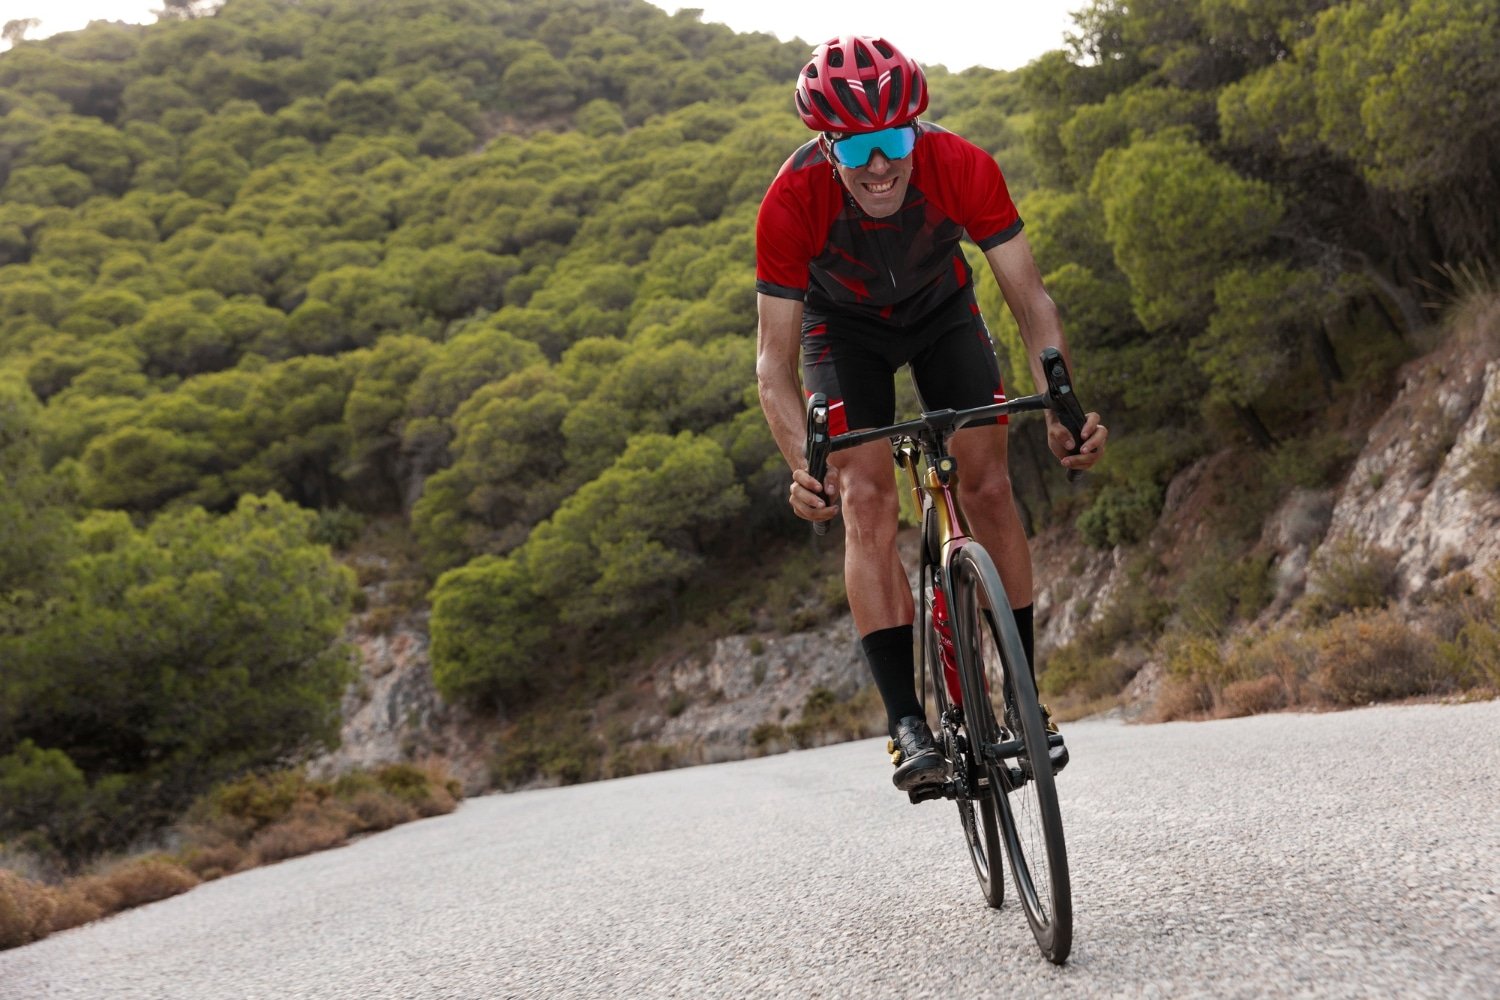 Hit The Trails With GIRO’s High-Performance Cycling Gear